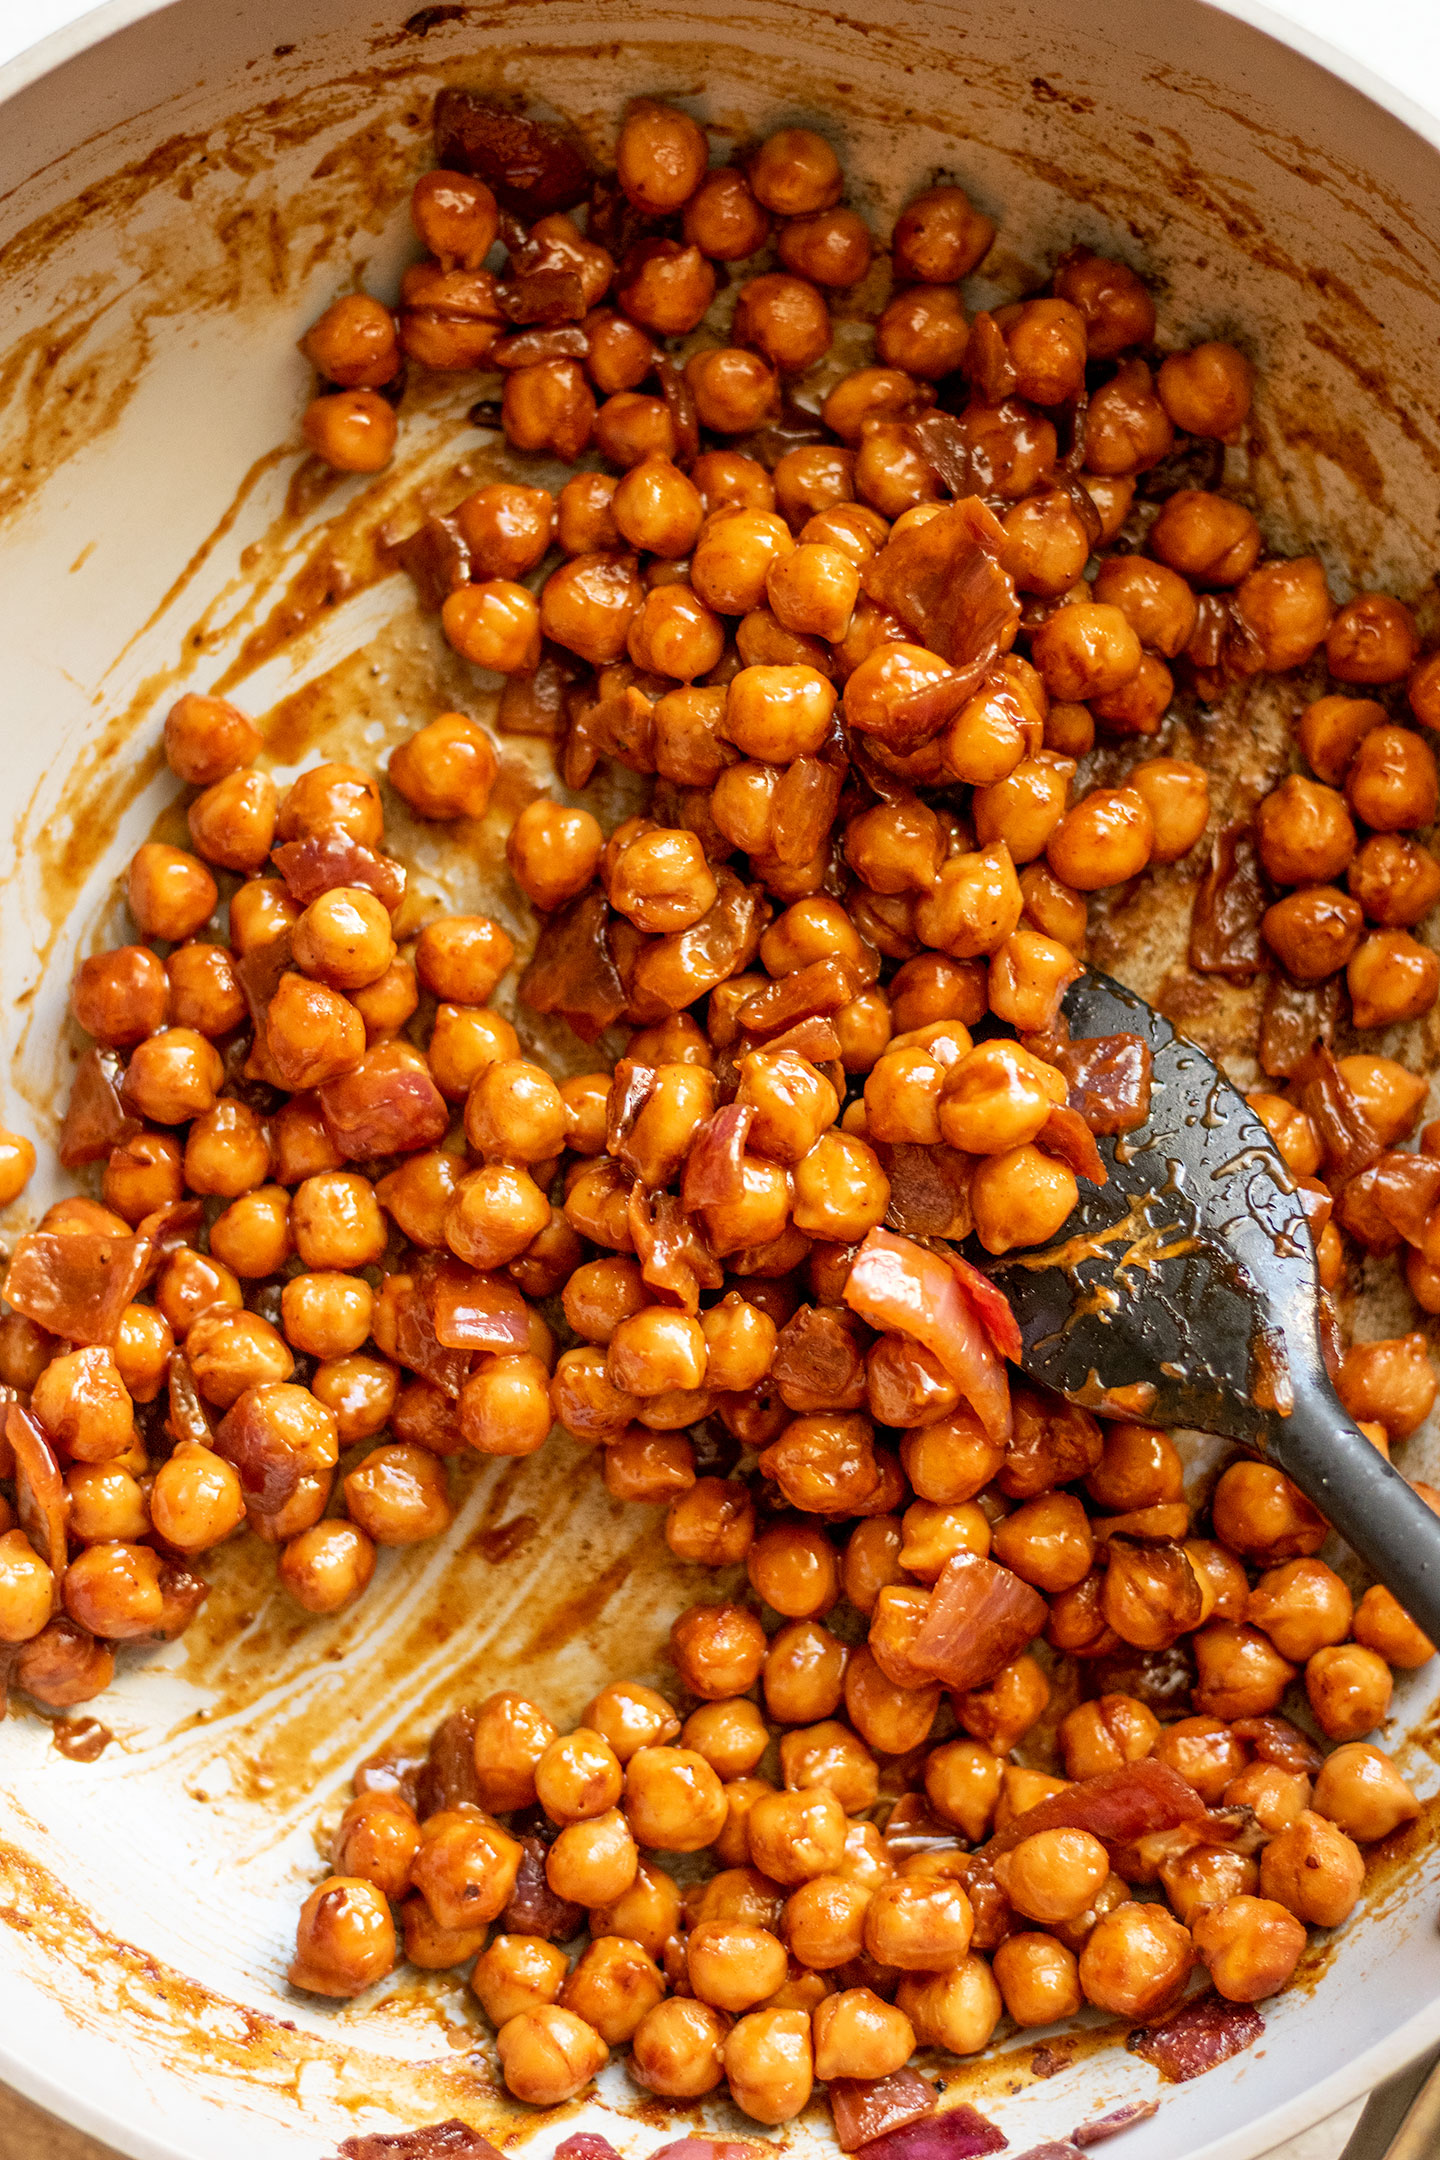 Sauteing chickpeas in barbecue sauce.